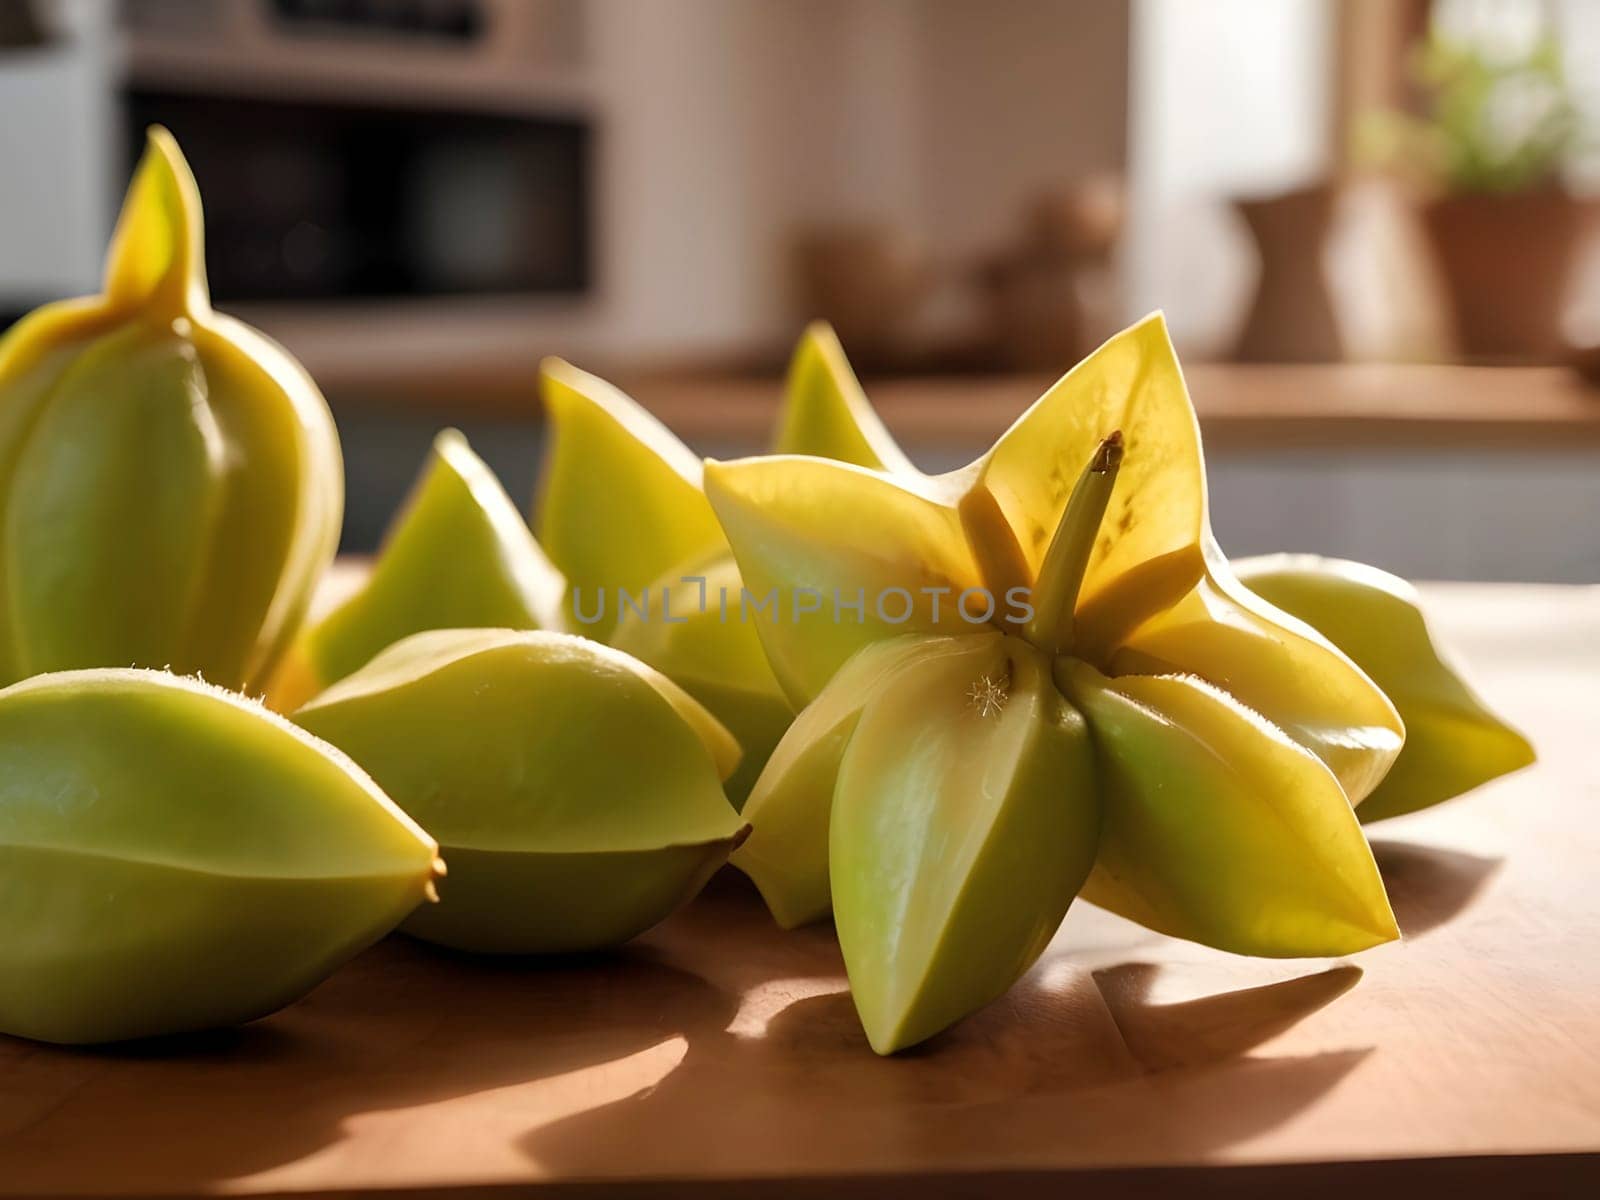 A Culinary Oasis: Star Fruit Bathed in Afternoon Light against a Blurry Kitchen Backdrop.